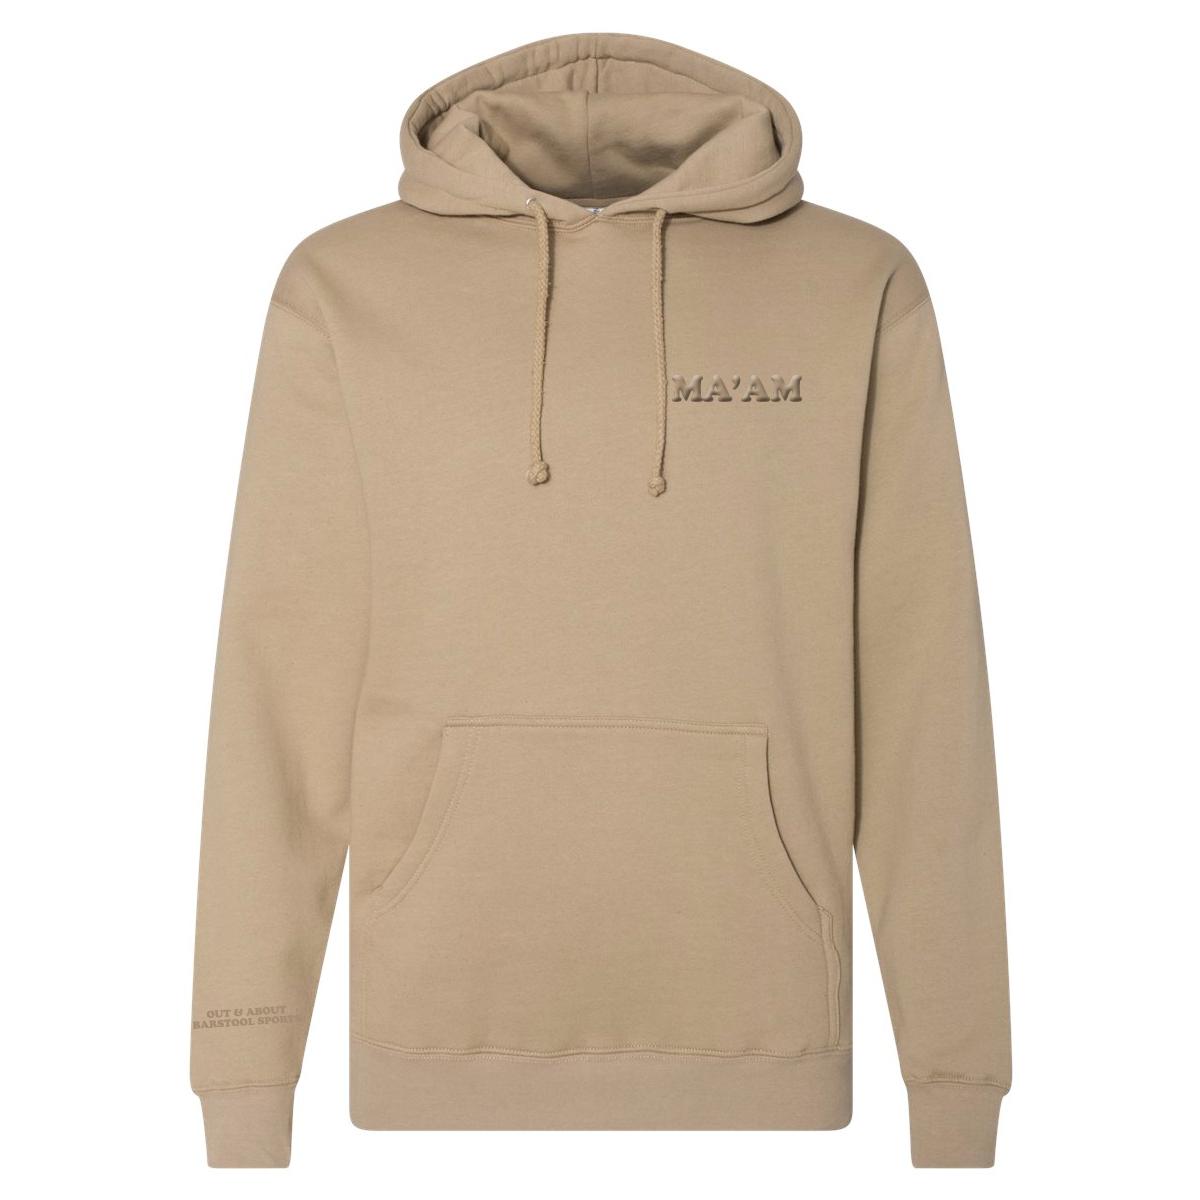 Ma'am Premium Hoodie-Hoodies & Sweatshirts-Out & About-Tan-S-Barstool Sports